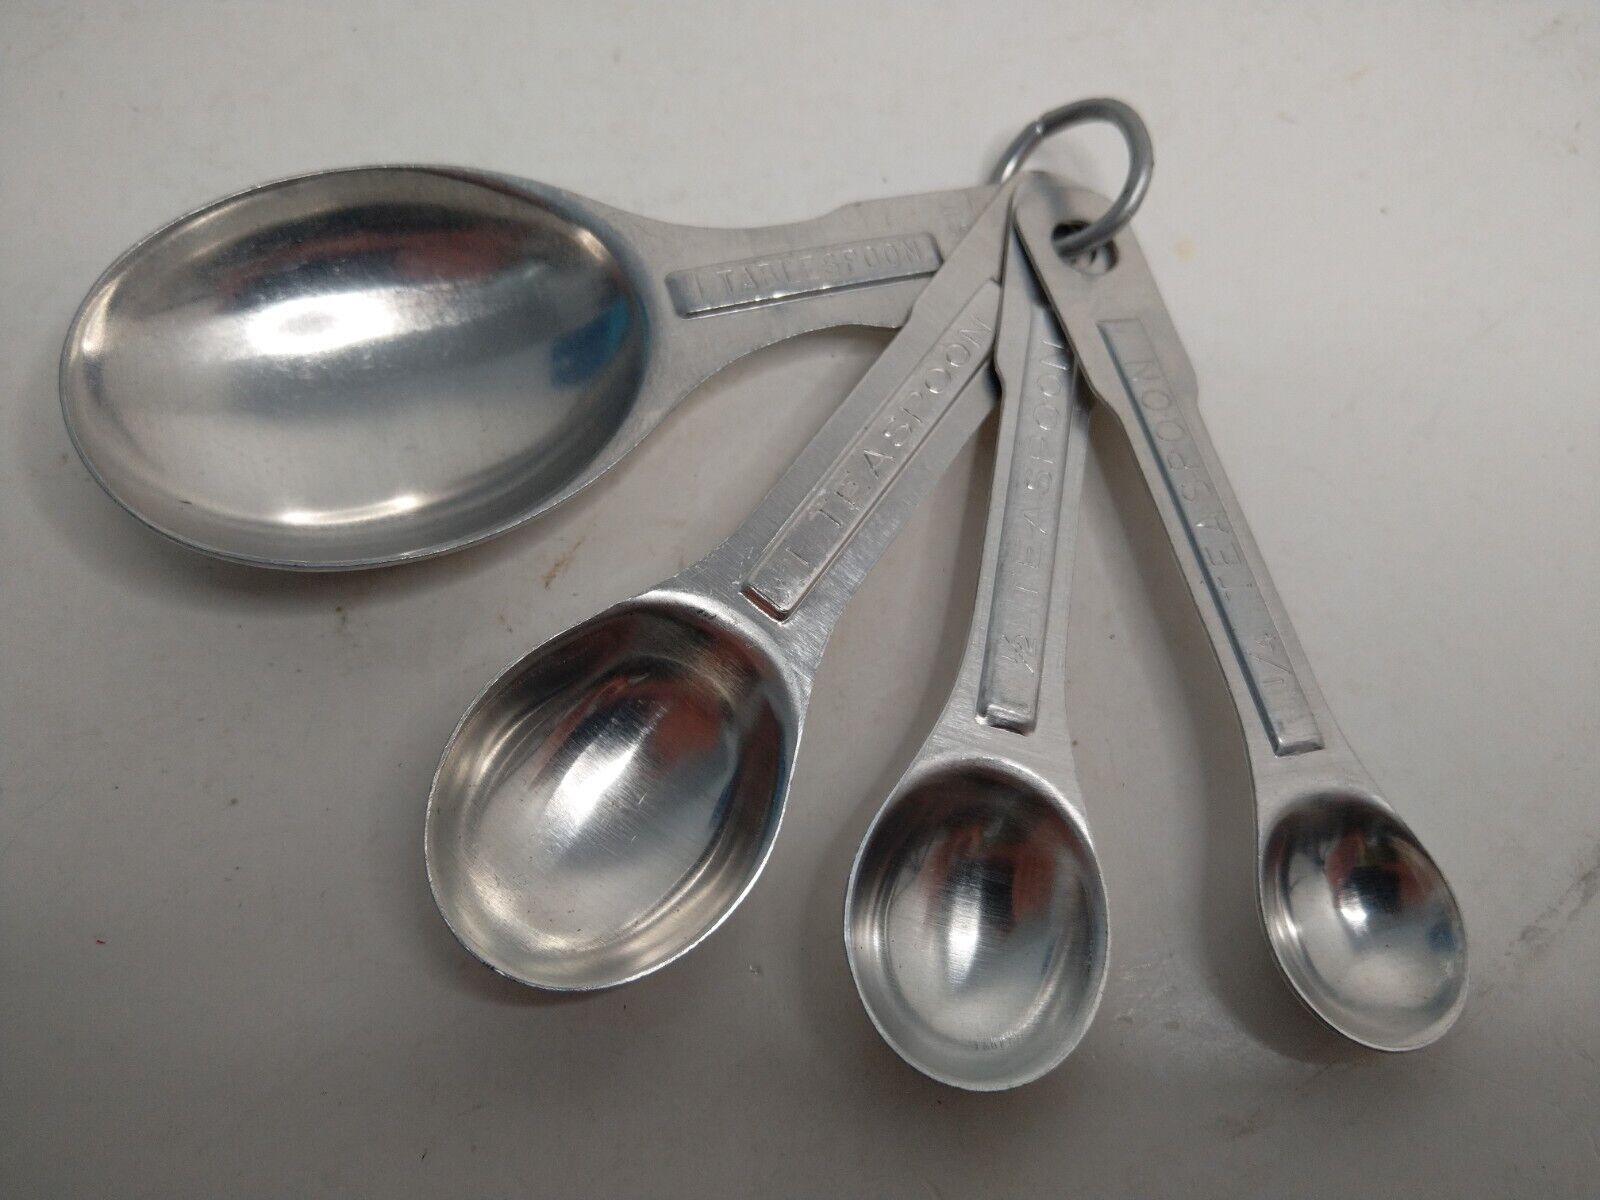 Vintage Aluminum Metal Nesting Oval Measuring Spoons With Ring US Std Set of 4